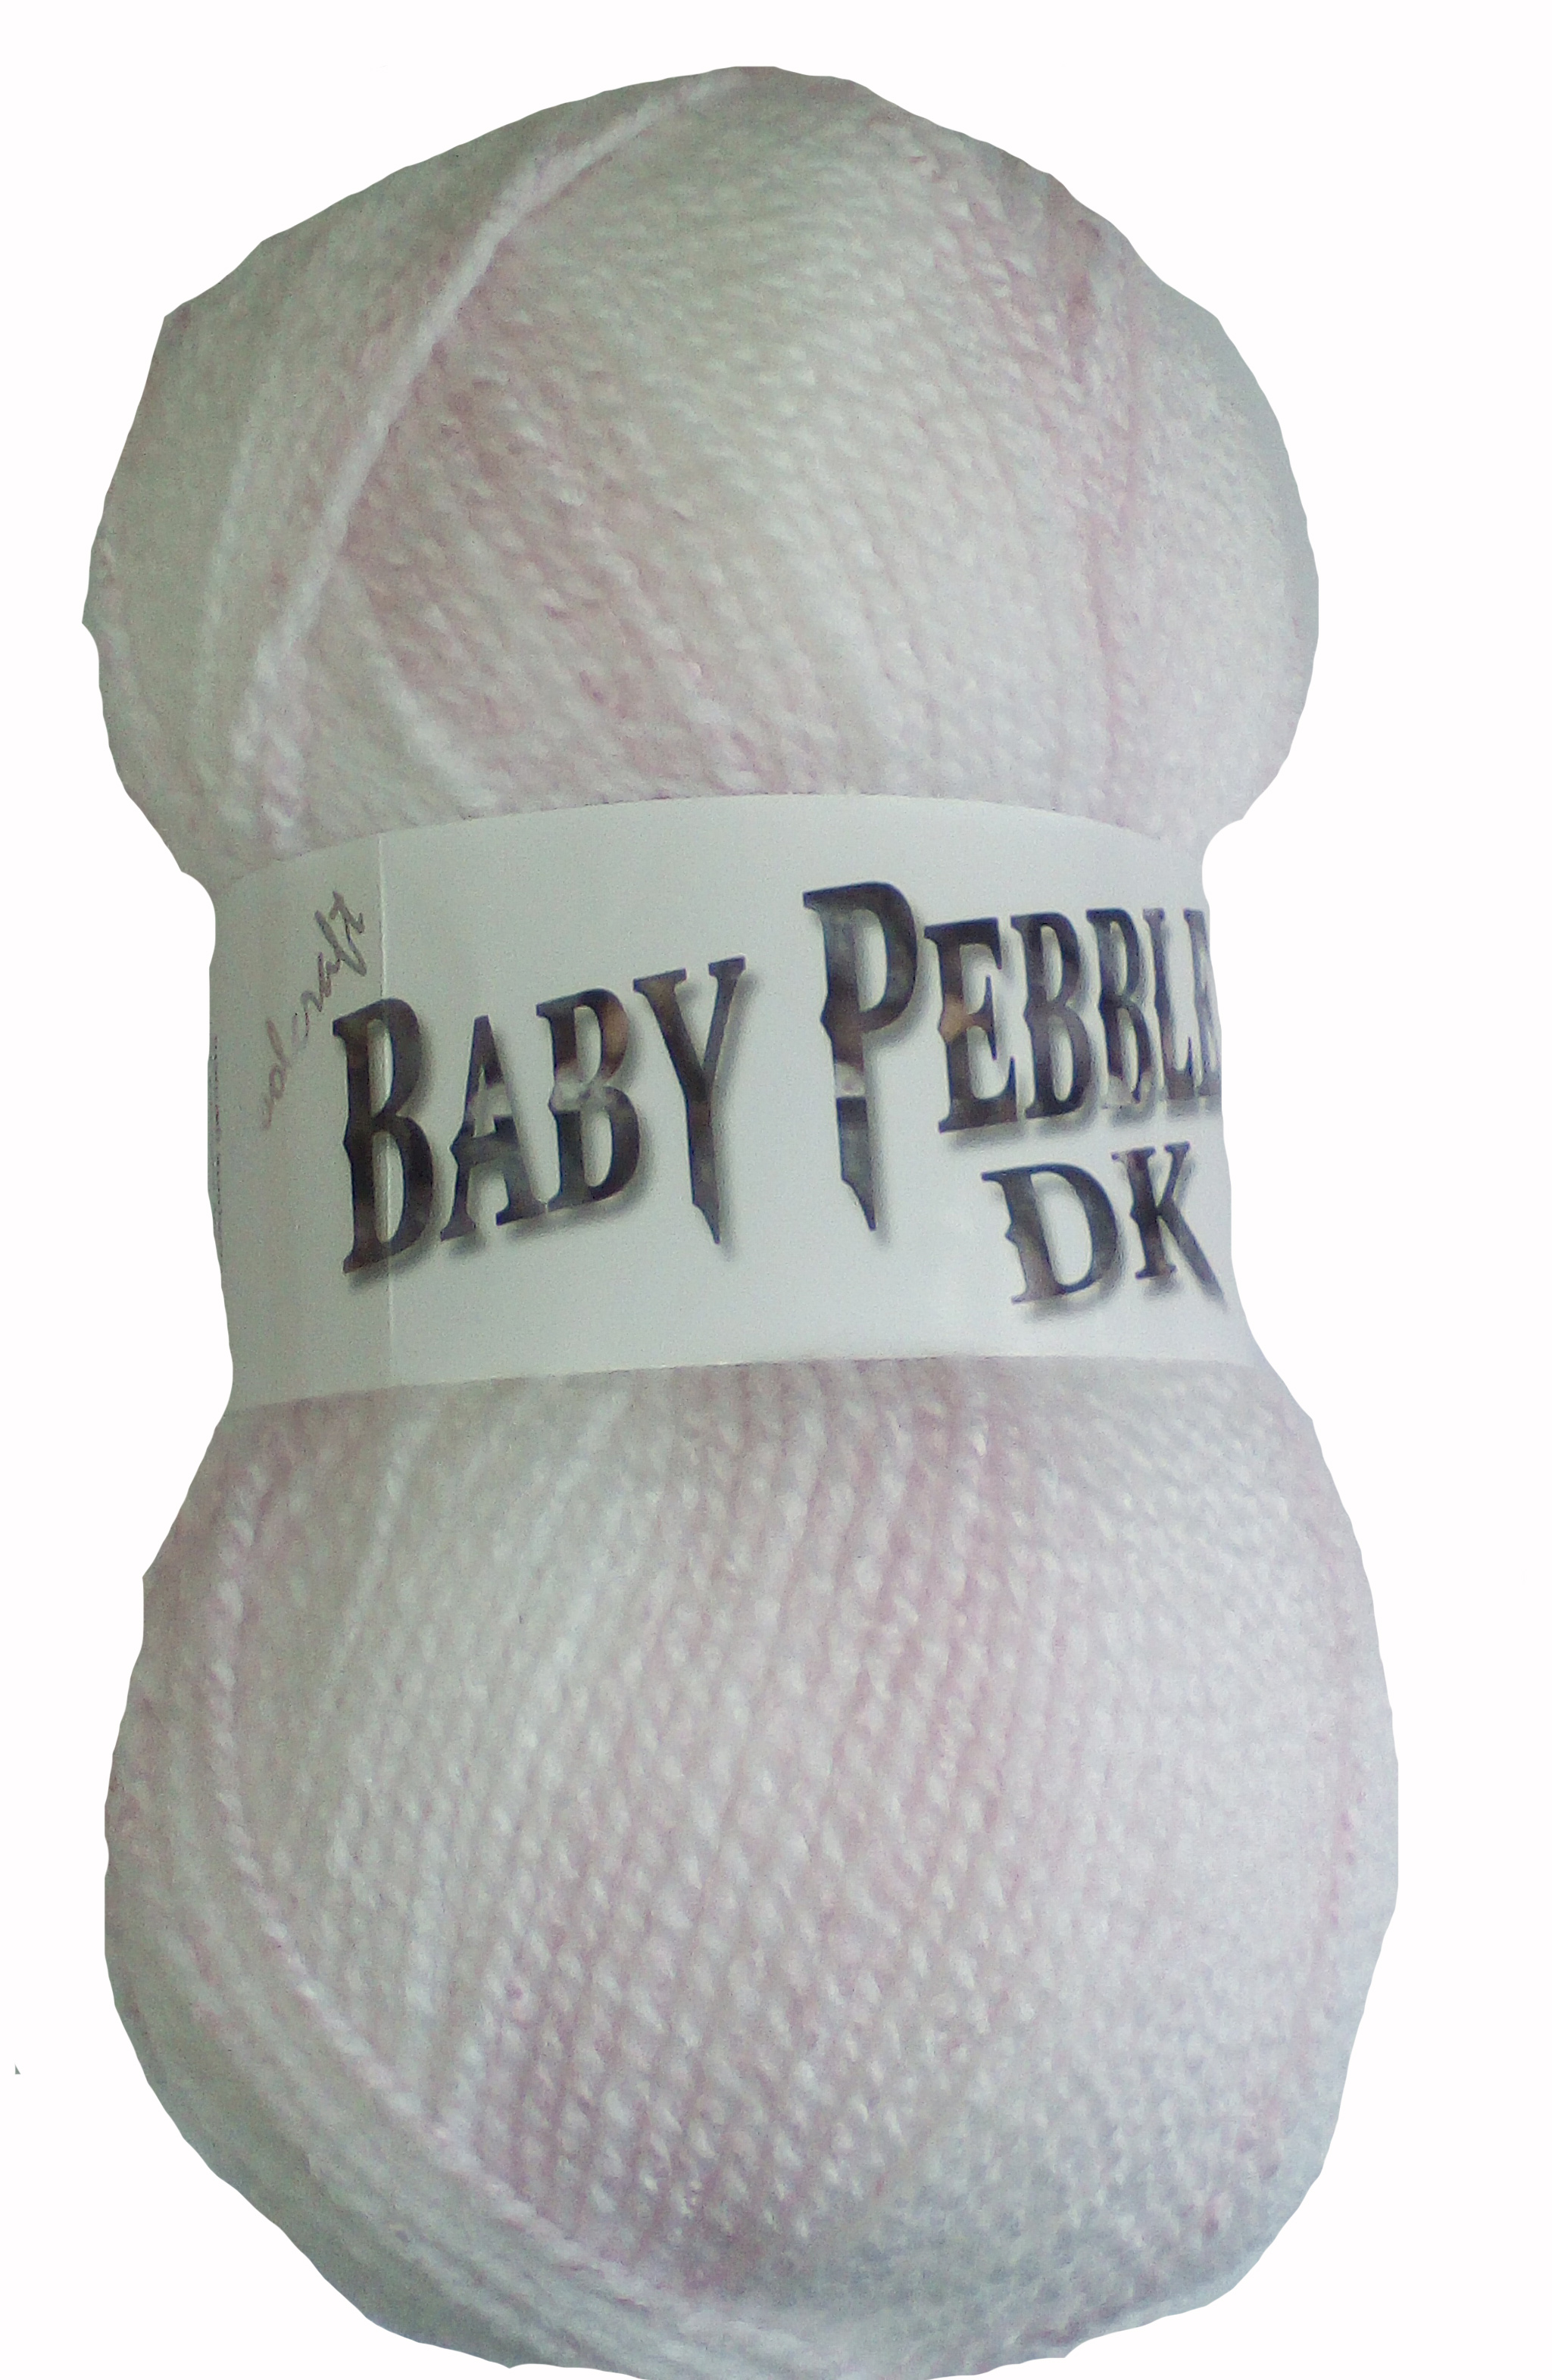 Baby Pebble 10x100g Balls Strawberry Mouse 107